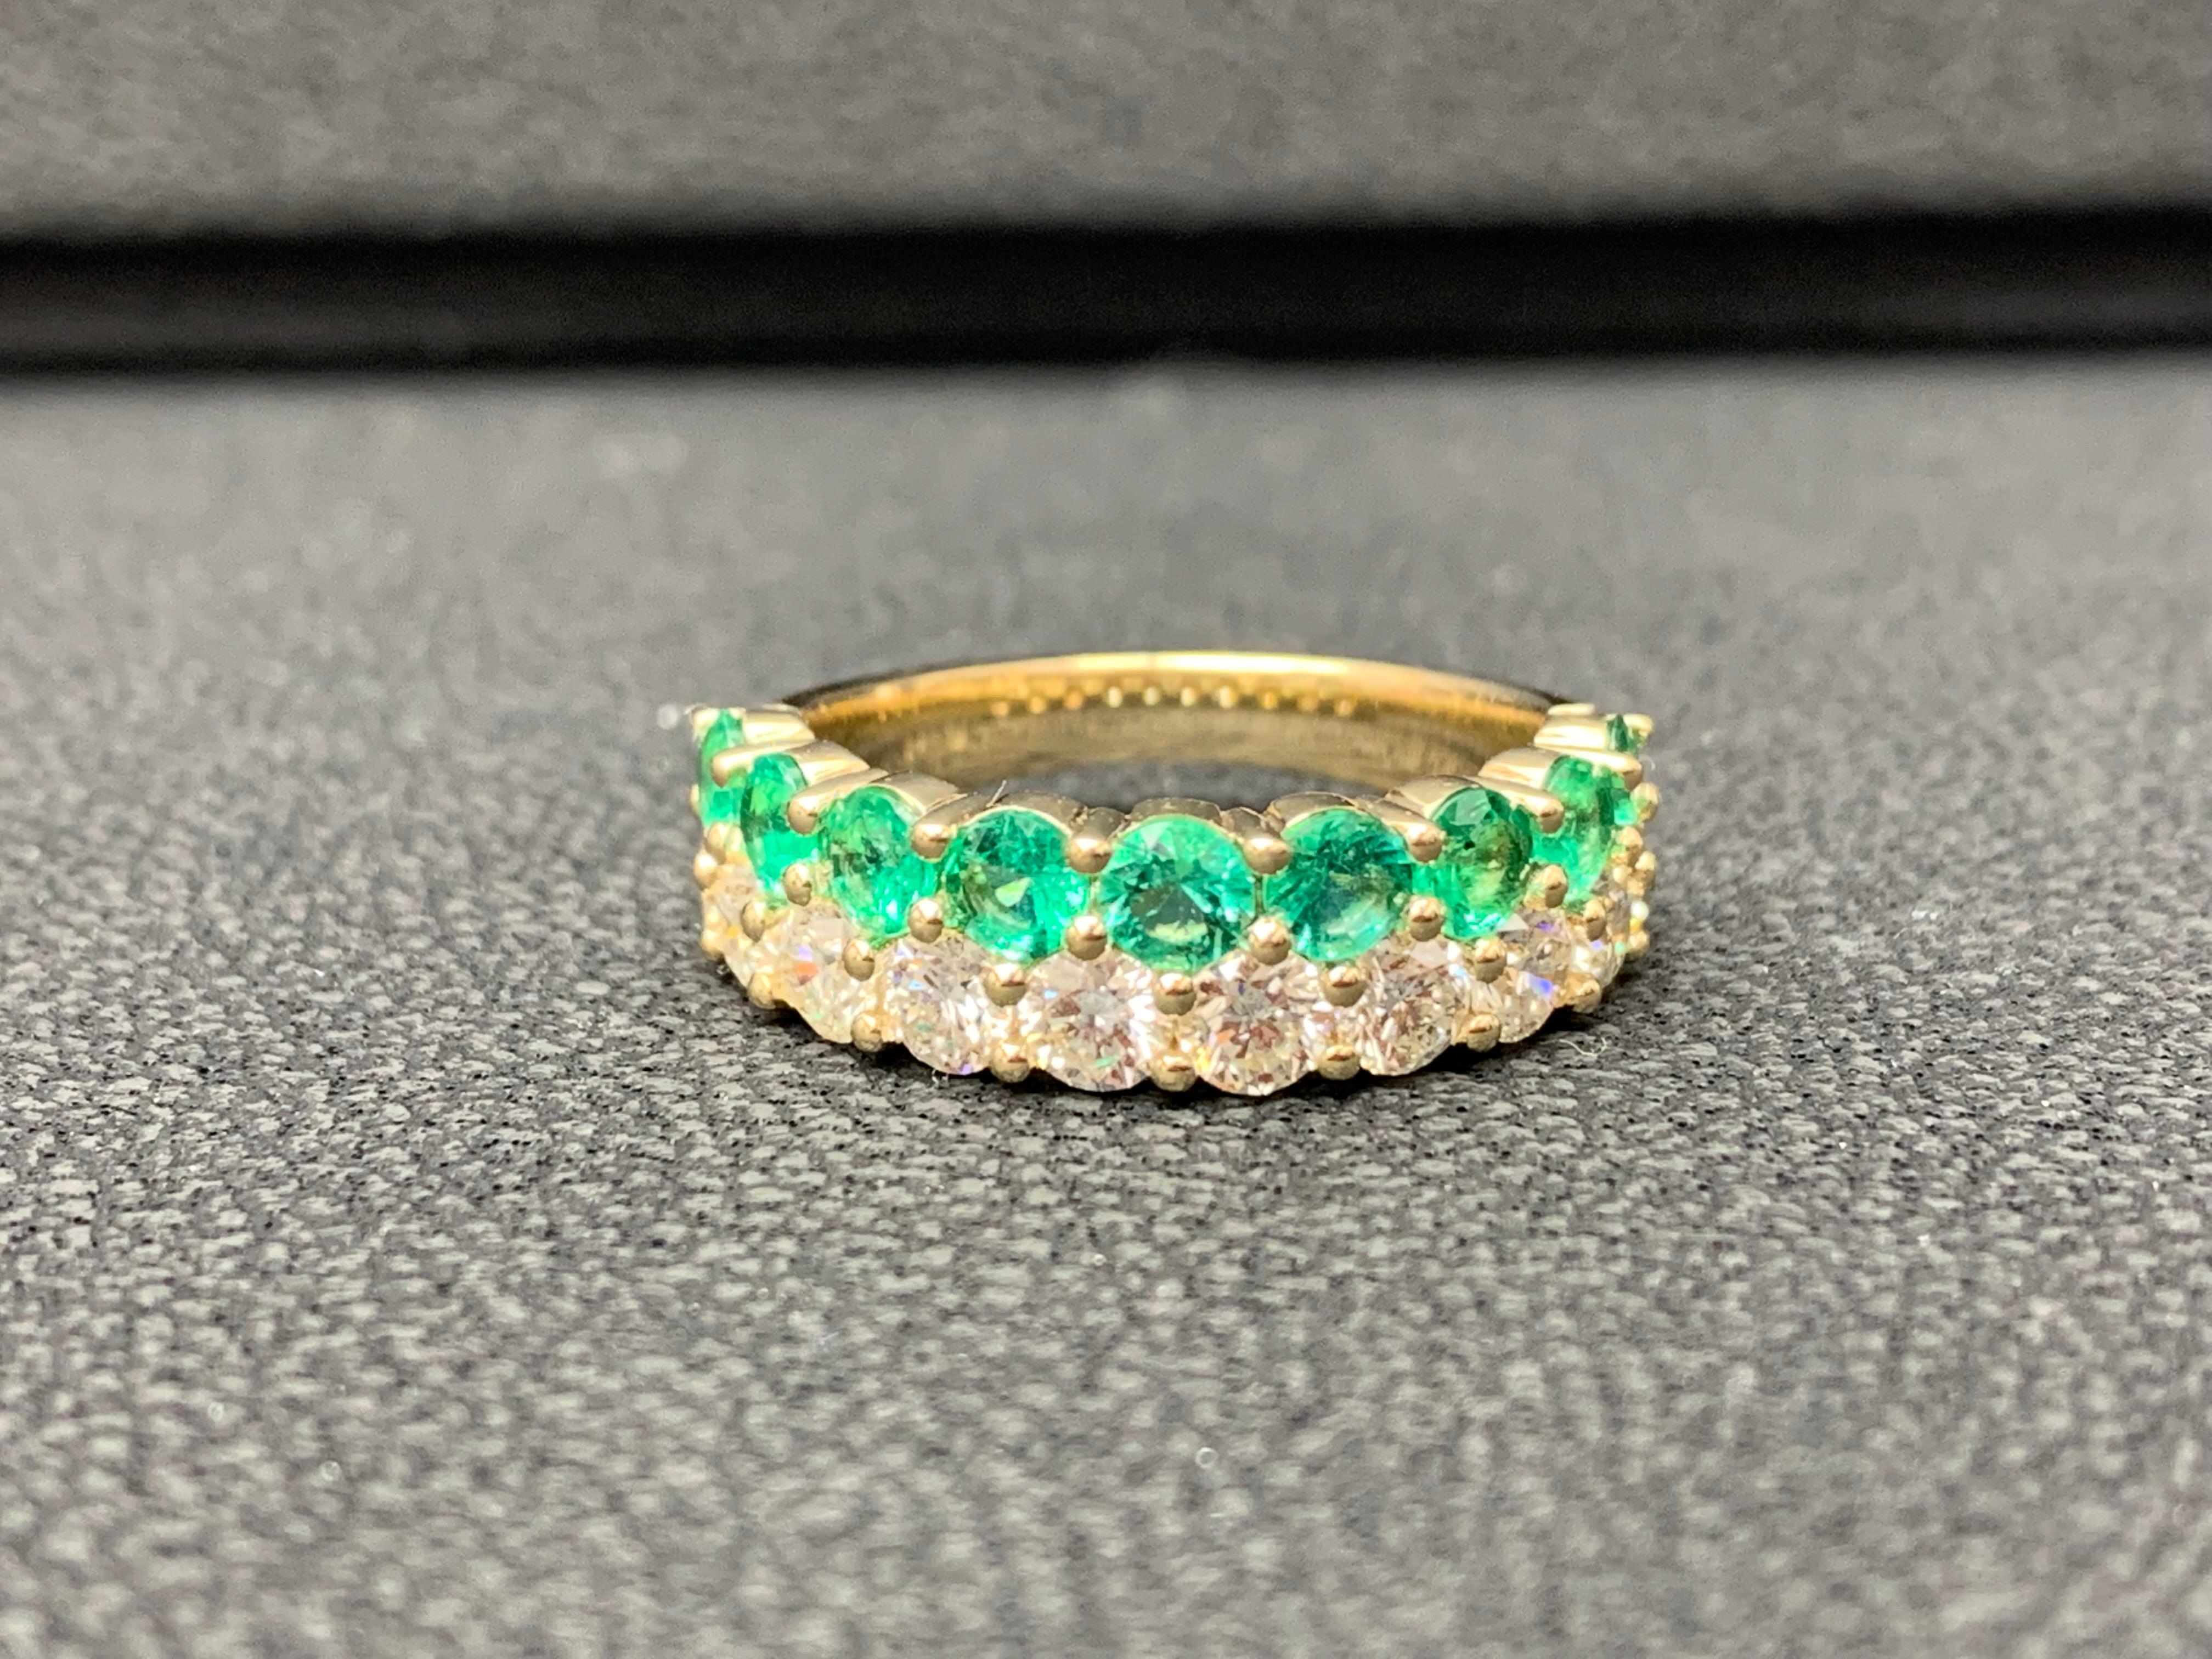 A unique and fashionable ring showcasing two rows of round-shape 9 emeralds and 10 diamonds, set in a band design. Emeralds weigh 1.08 carats and Diamonds weigh 1.49 carats total. A brilliant and masterfully-made piece.

Style available in different